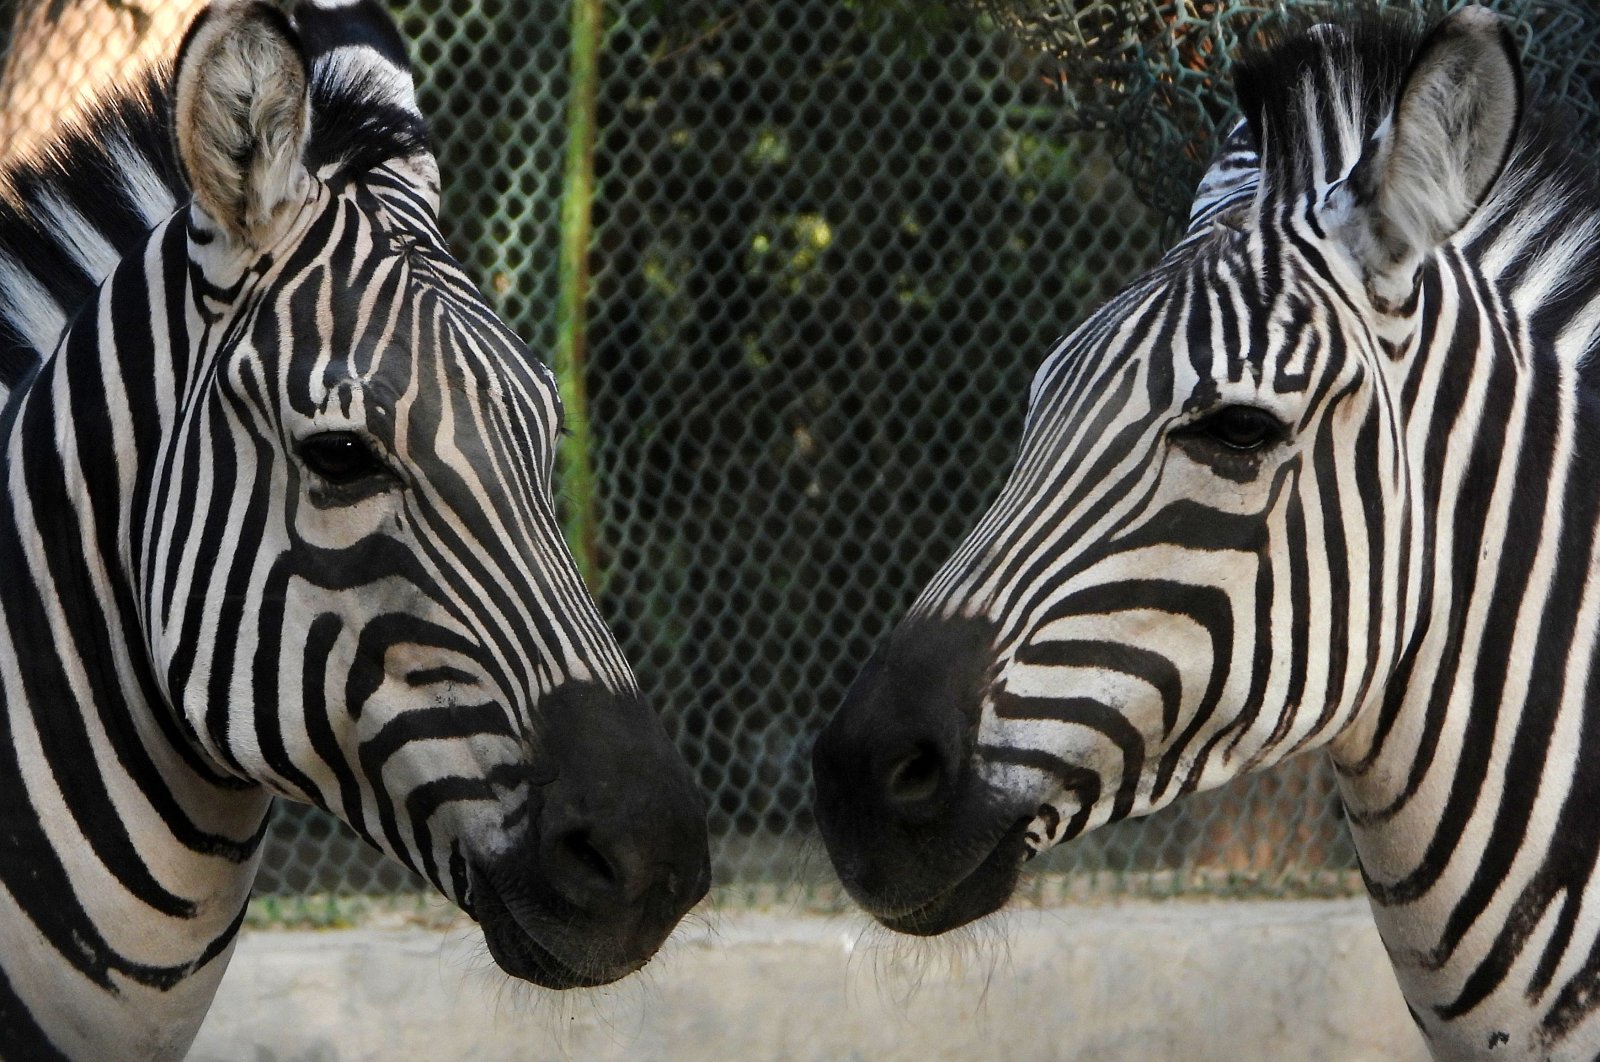 Zebras are pictured in their enclosure at the Kuwait Zoo in the capital Kuwait City,  May 7, 2021. For nearly two months, a pair of zebras have been on the run near the U.S. capital Washington, D.C, successfully evading attempts to catch them. (AFP File Photo)